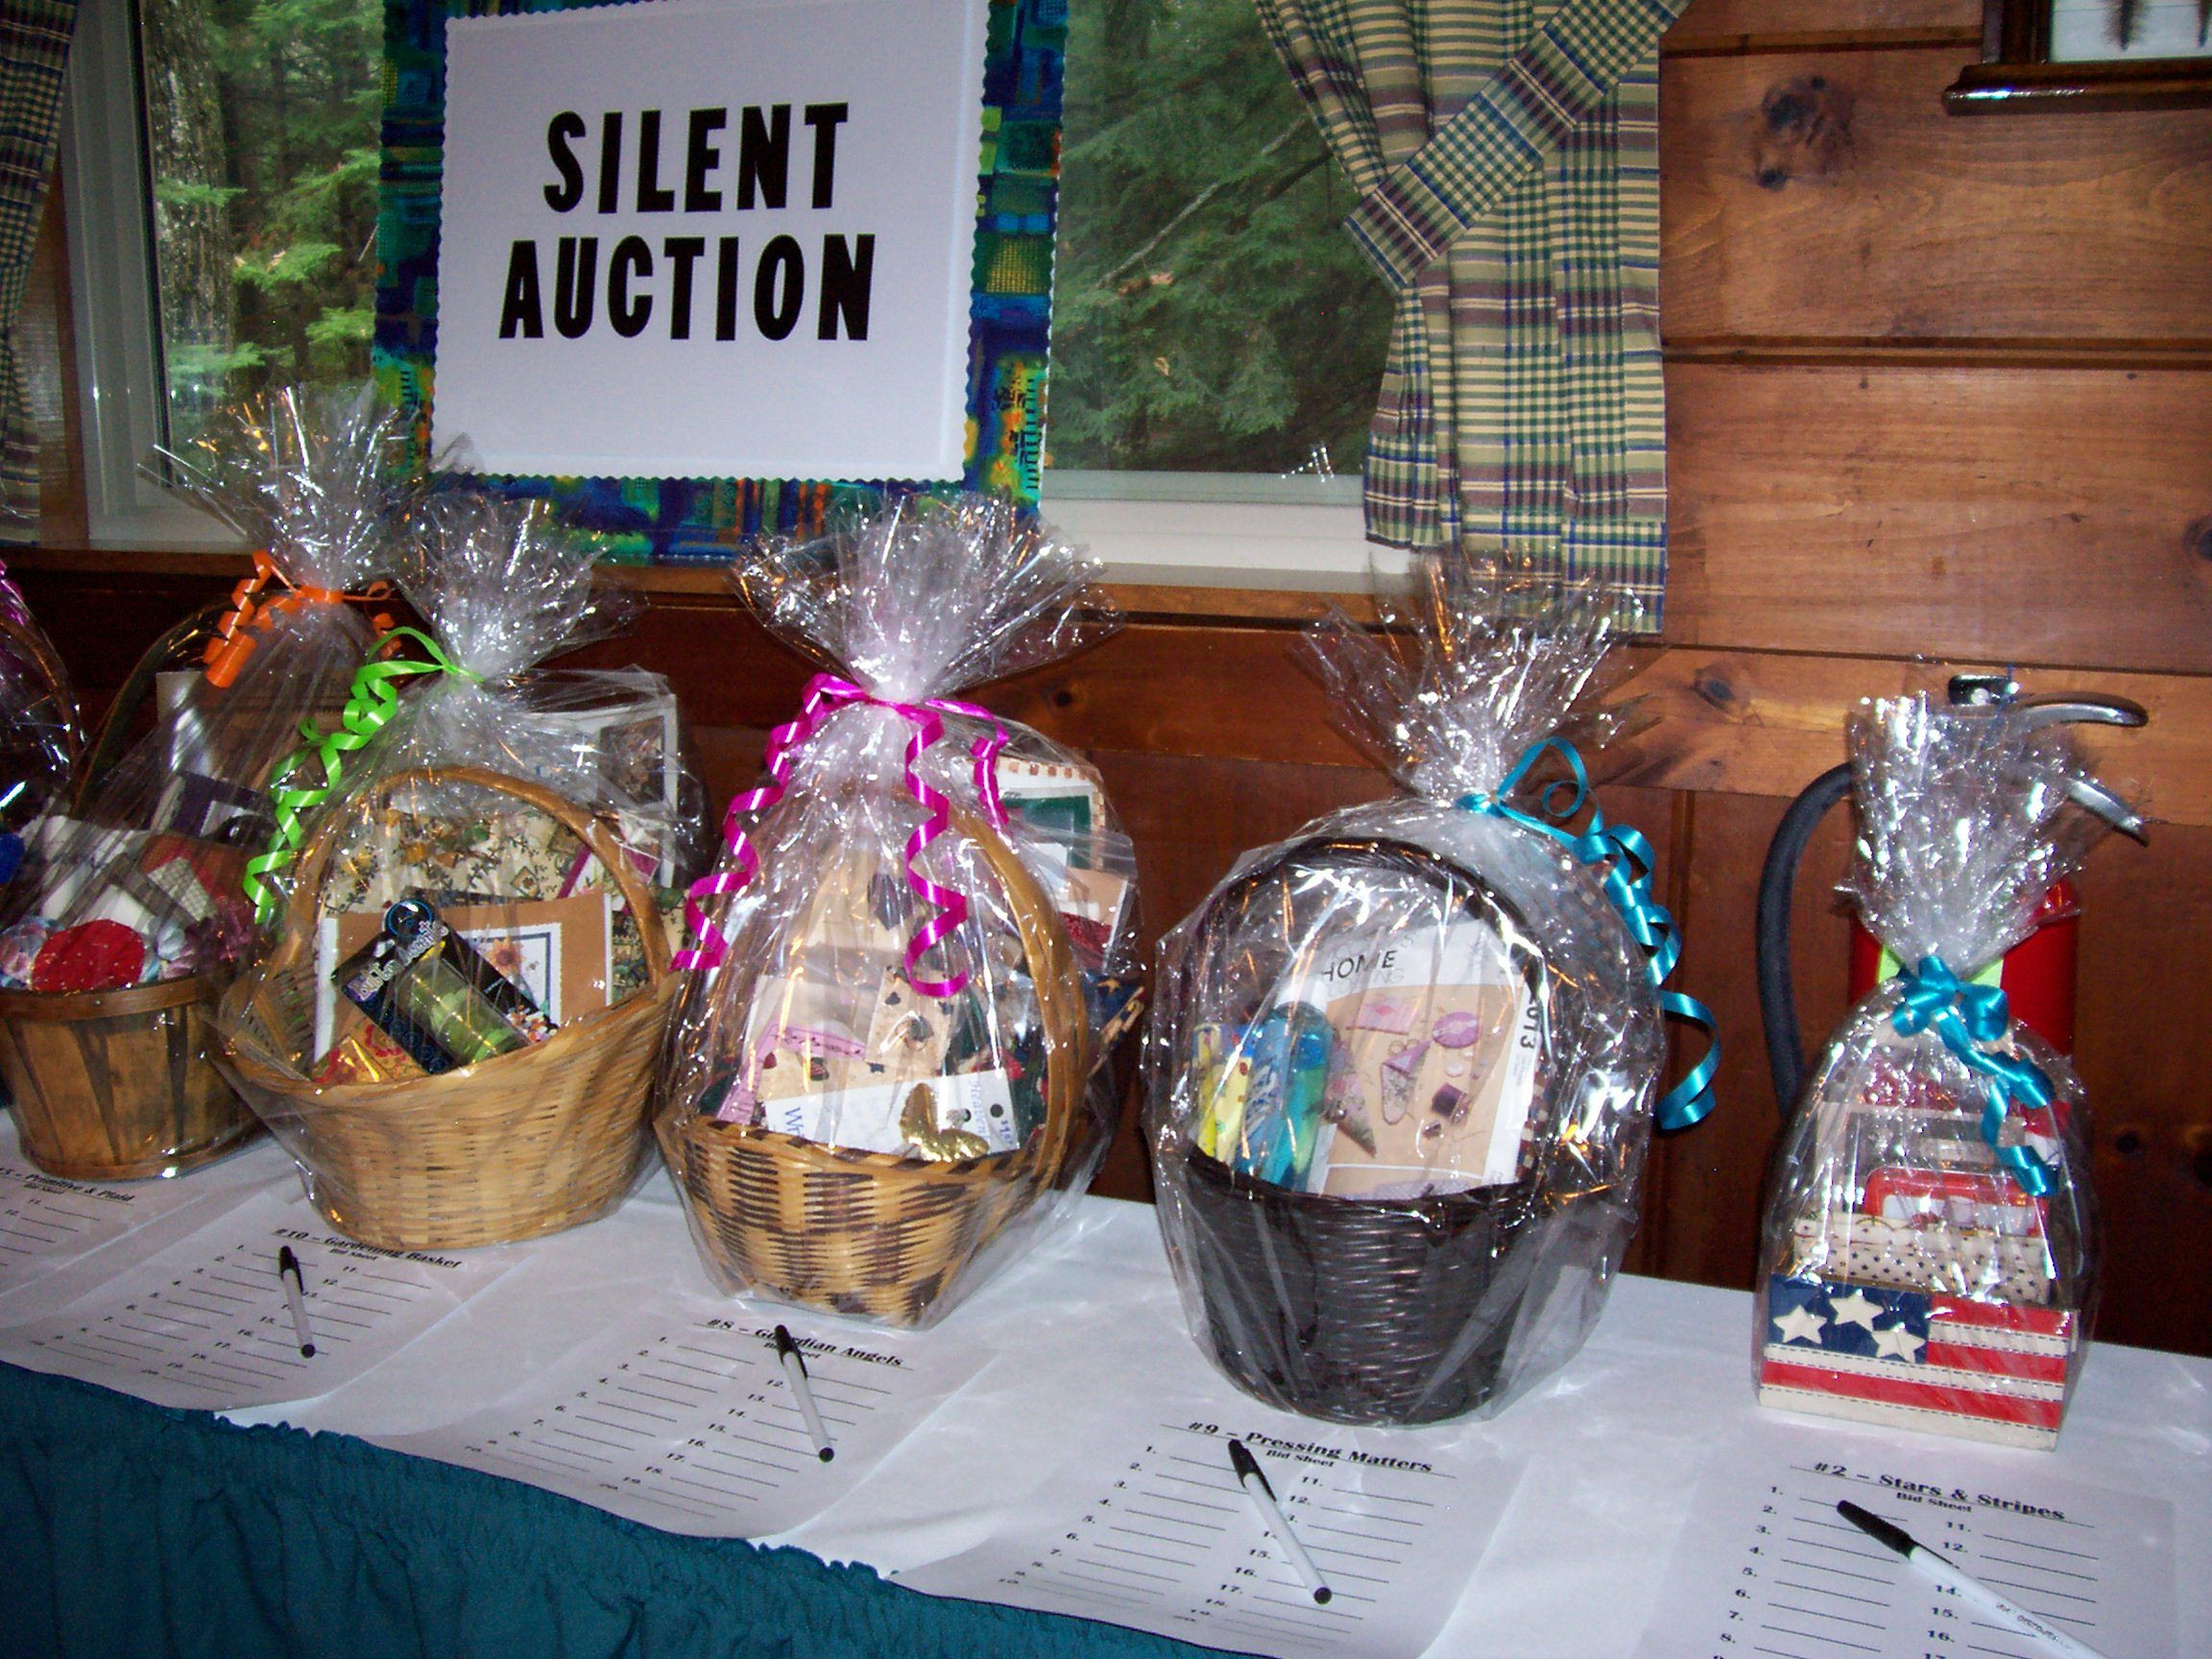 Gift Basket Theme Ideas For Silent Auction
 Silent Auction Strategy 5 Silent Auction Basket Ideas